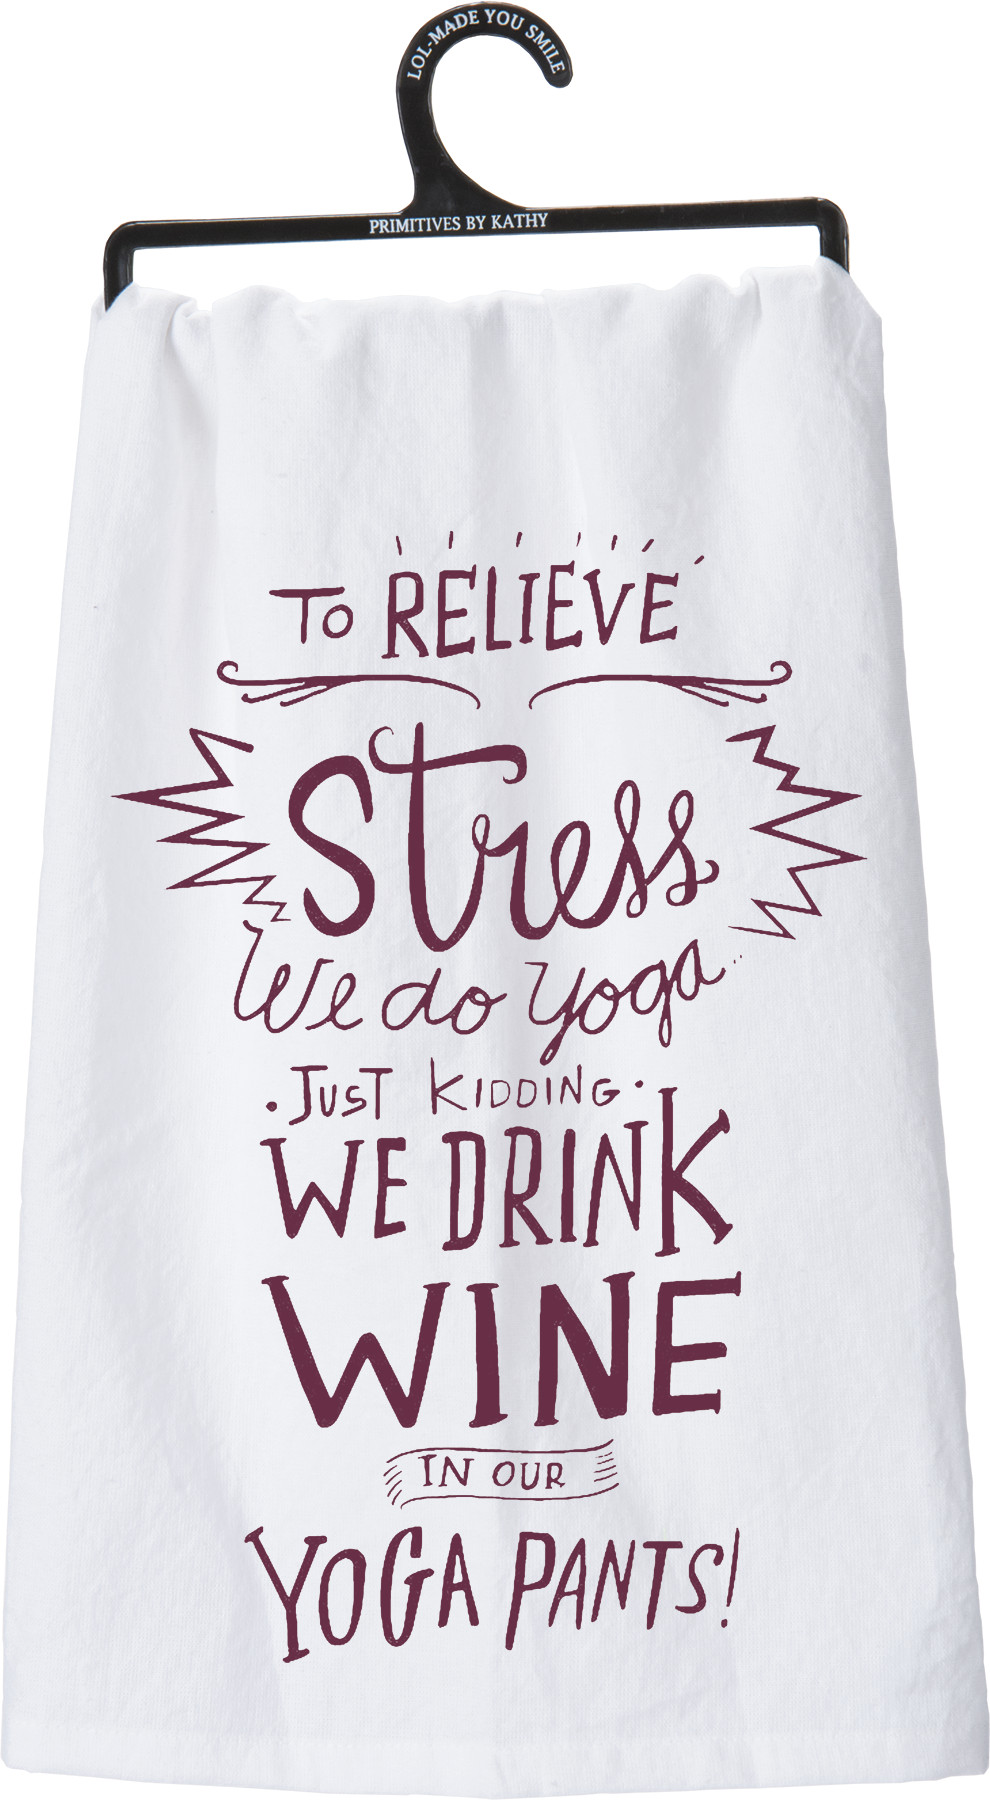 Wine And Mode Towel Drink Mode On Hand Towel Funny Wine Kitchen Towel Wine Kitchen Towel Towels With Sayings Funny Decor